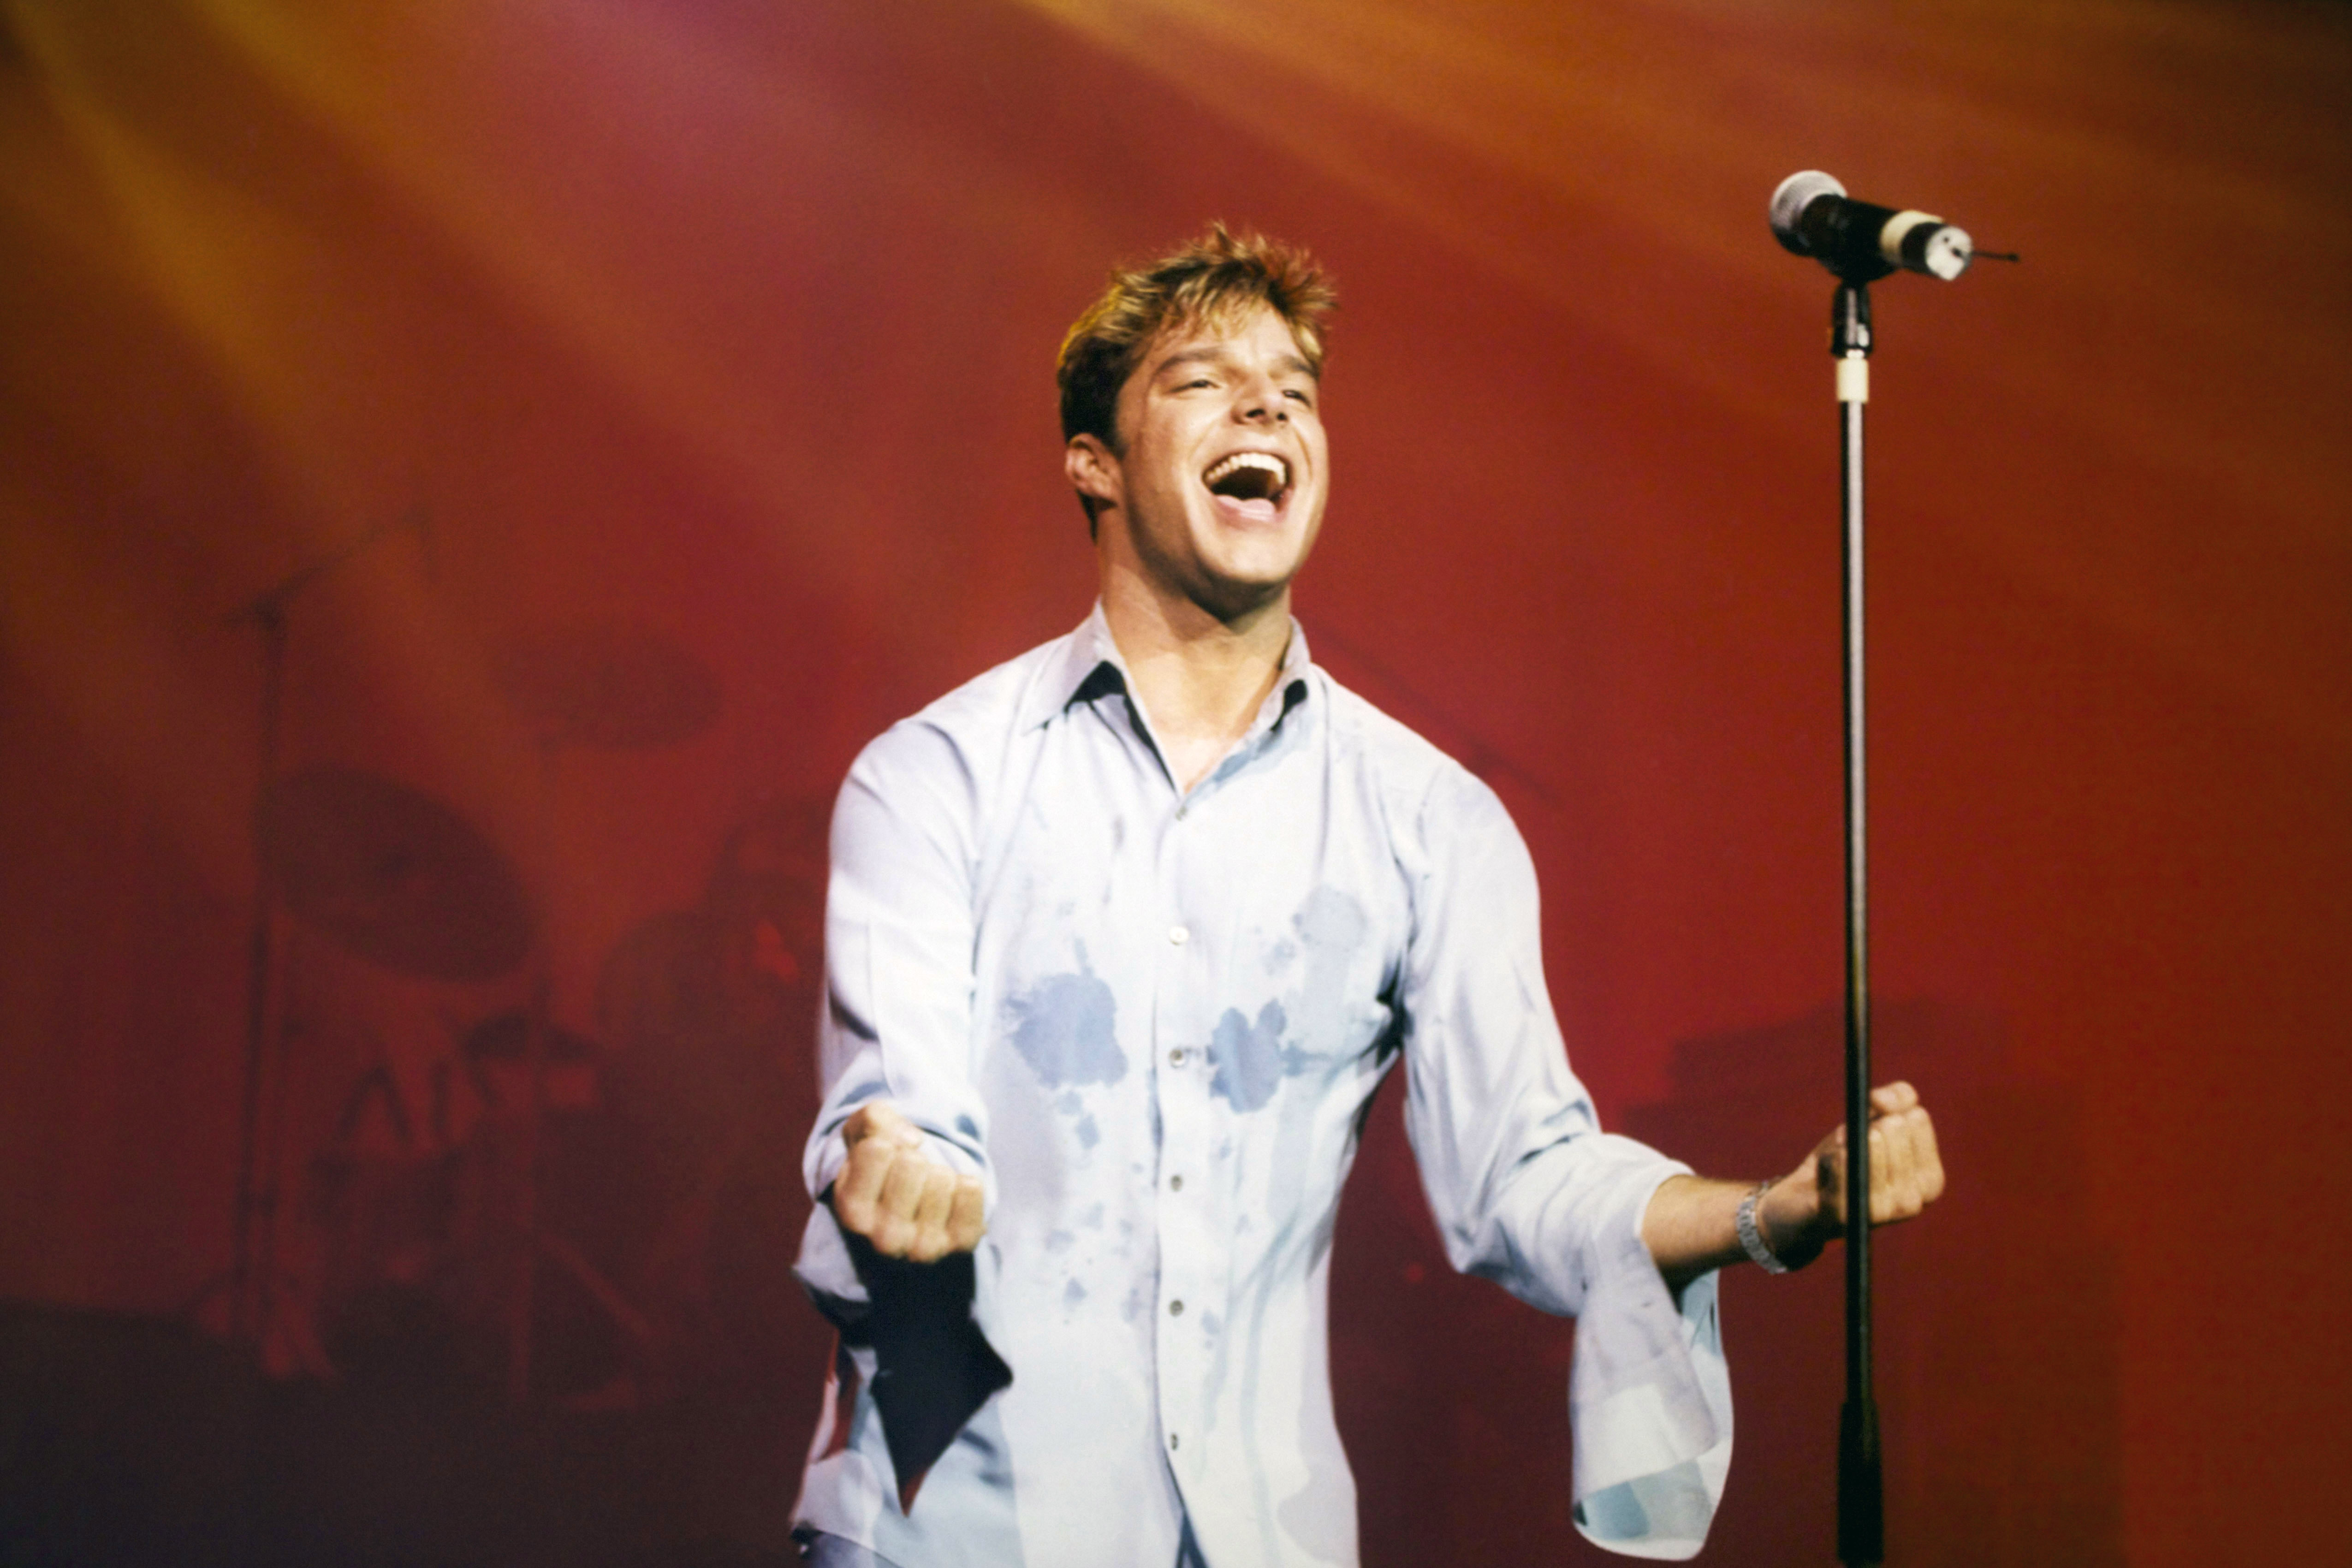 Ricky Martin performs at the Zénith on December 5, 1997, in Paris, France. | Source: Getty Images